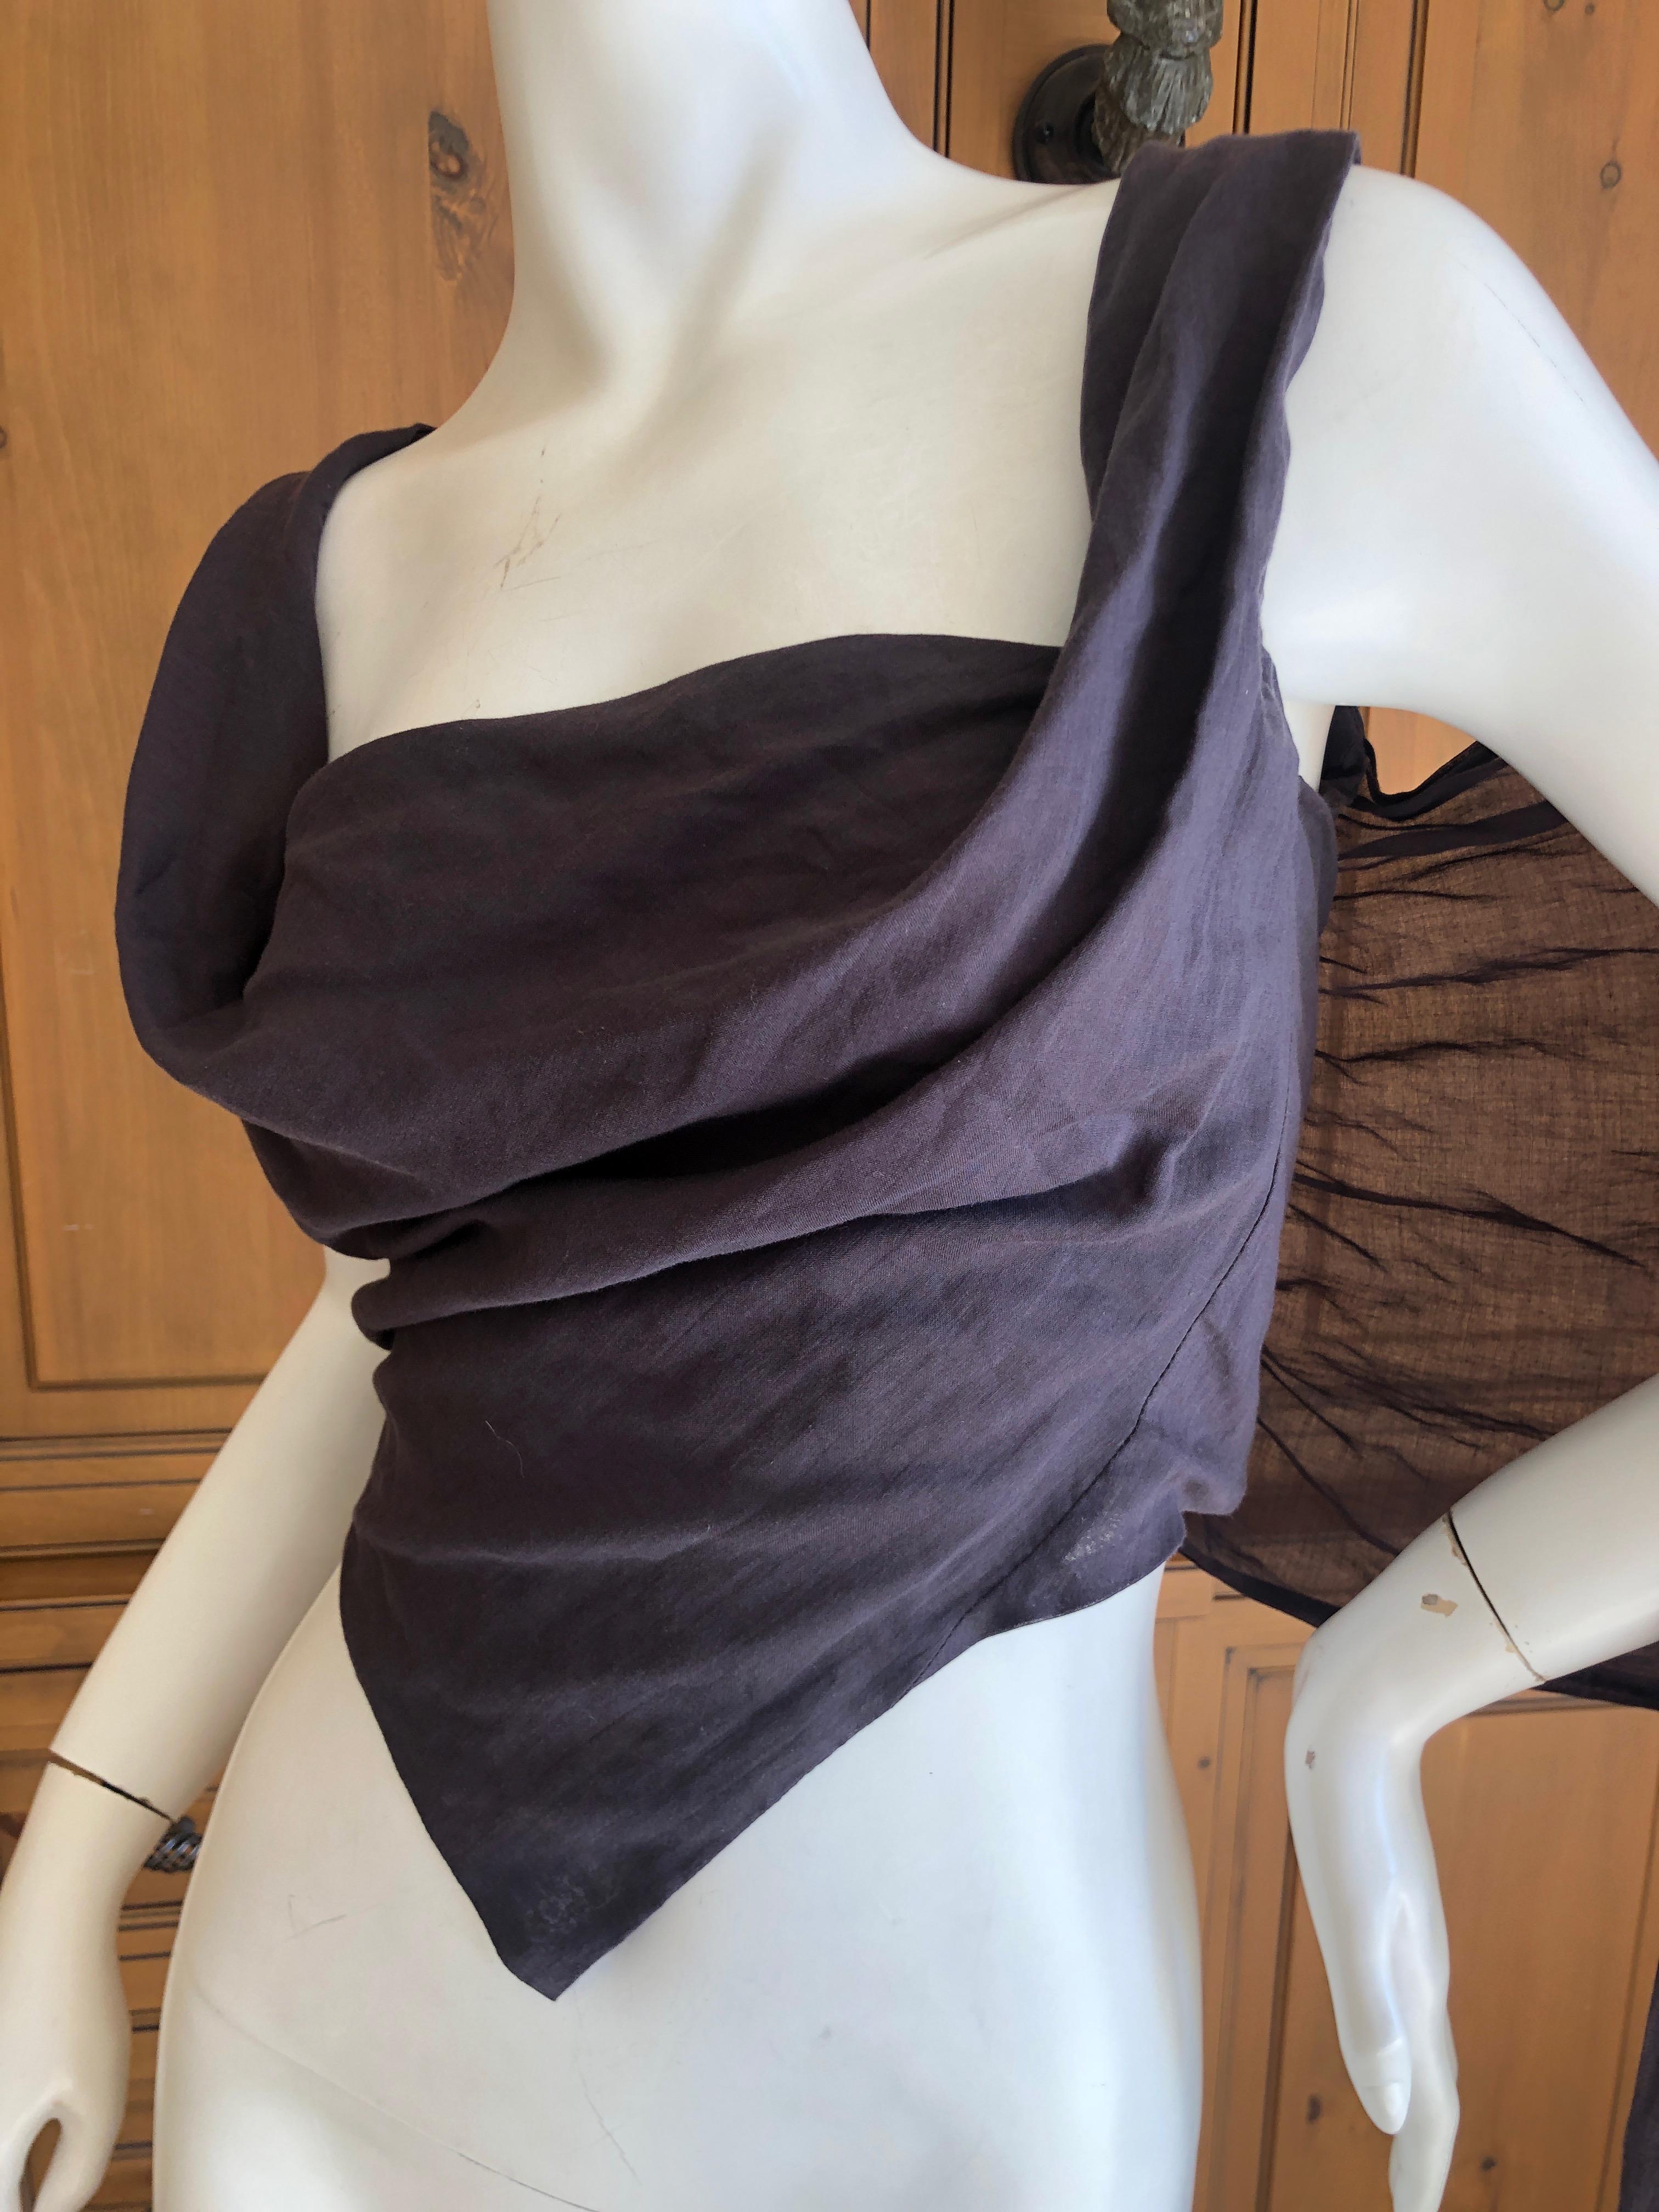 Vivienne Westwood Anglomania Gray Corset Top with Trailing Scarves Back.
So pretty, not certain how to style it
Size 42
Bust 34